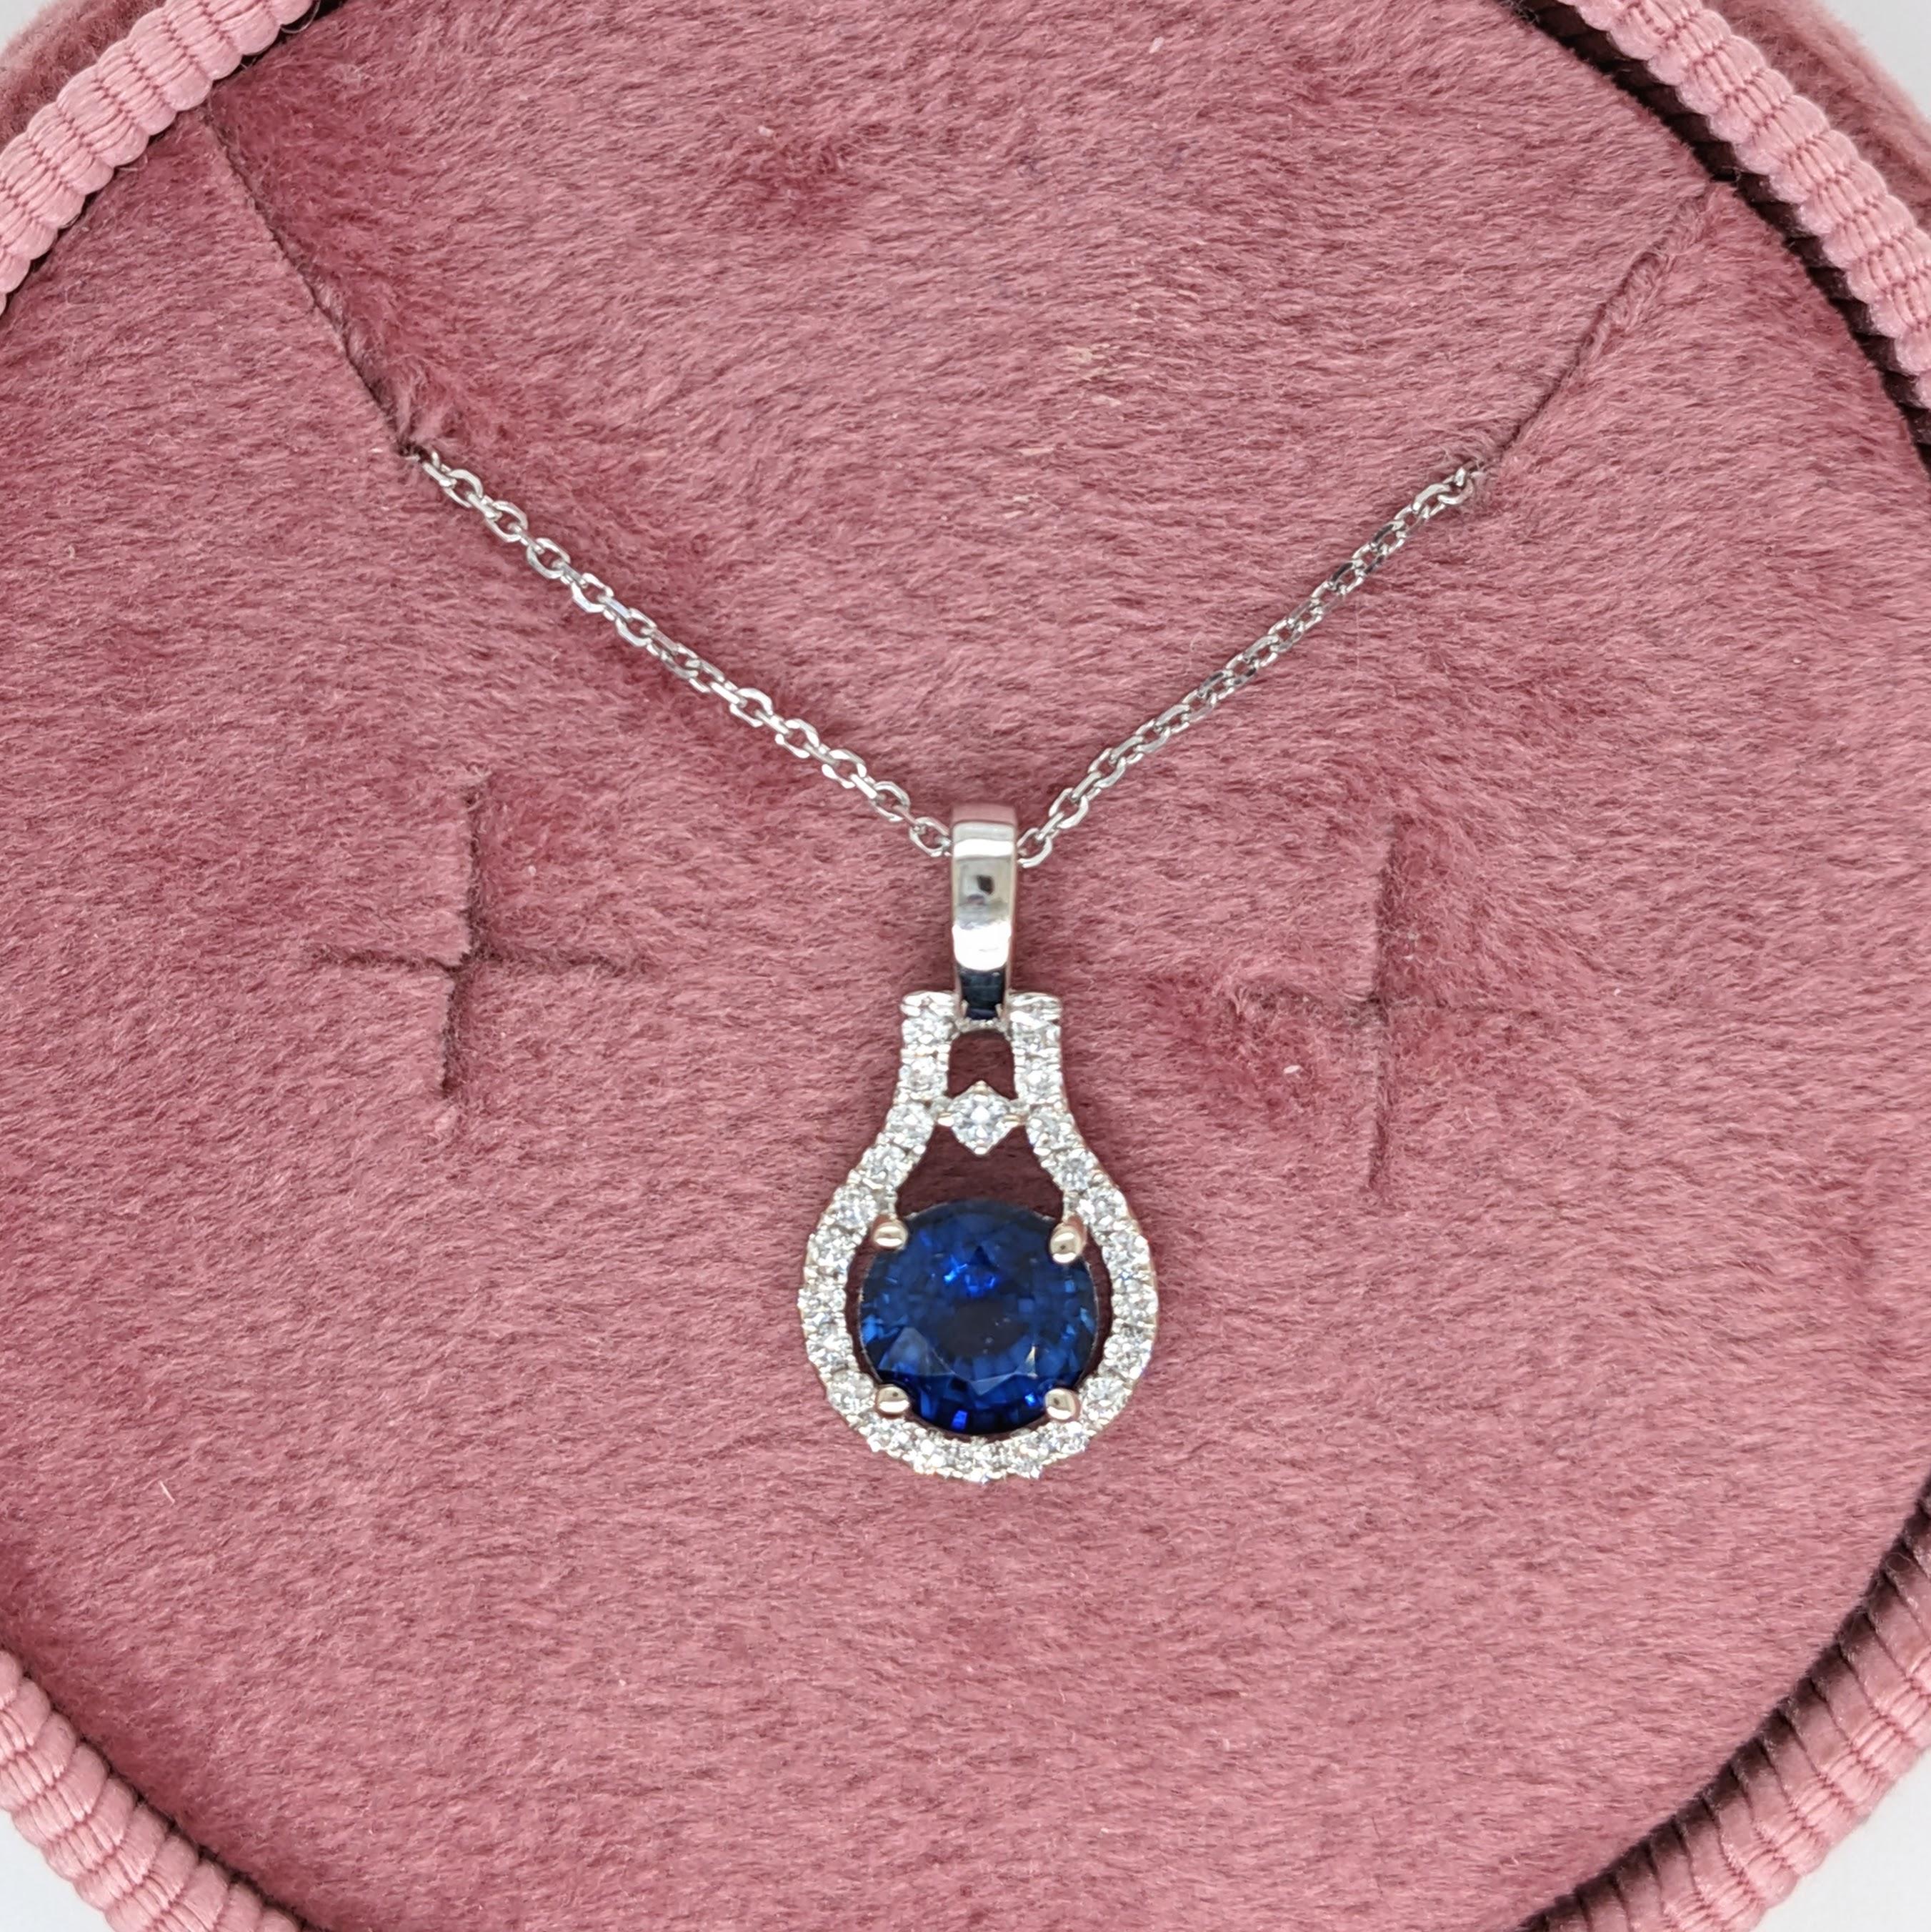 Modernist 1.21ct AAA Blue Sapphire w Diamond Accents in Solid 14K White Gold Round 6mm